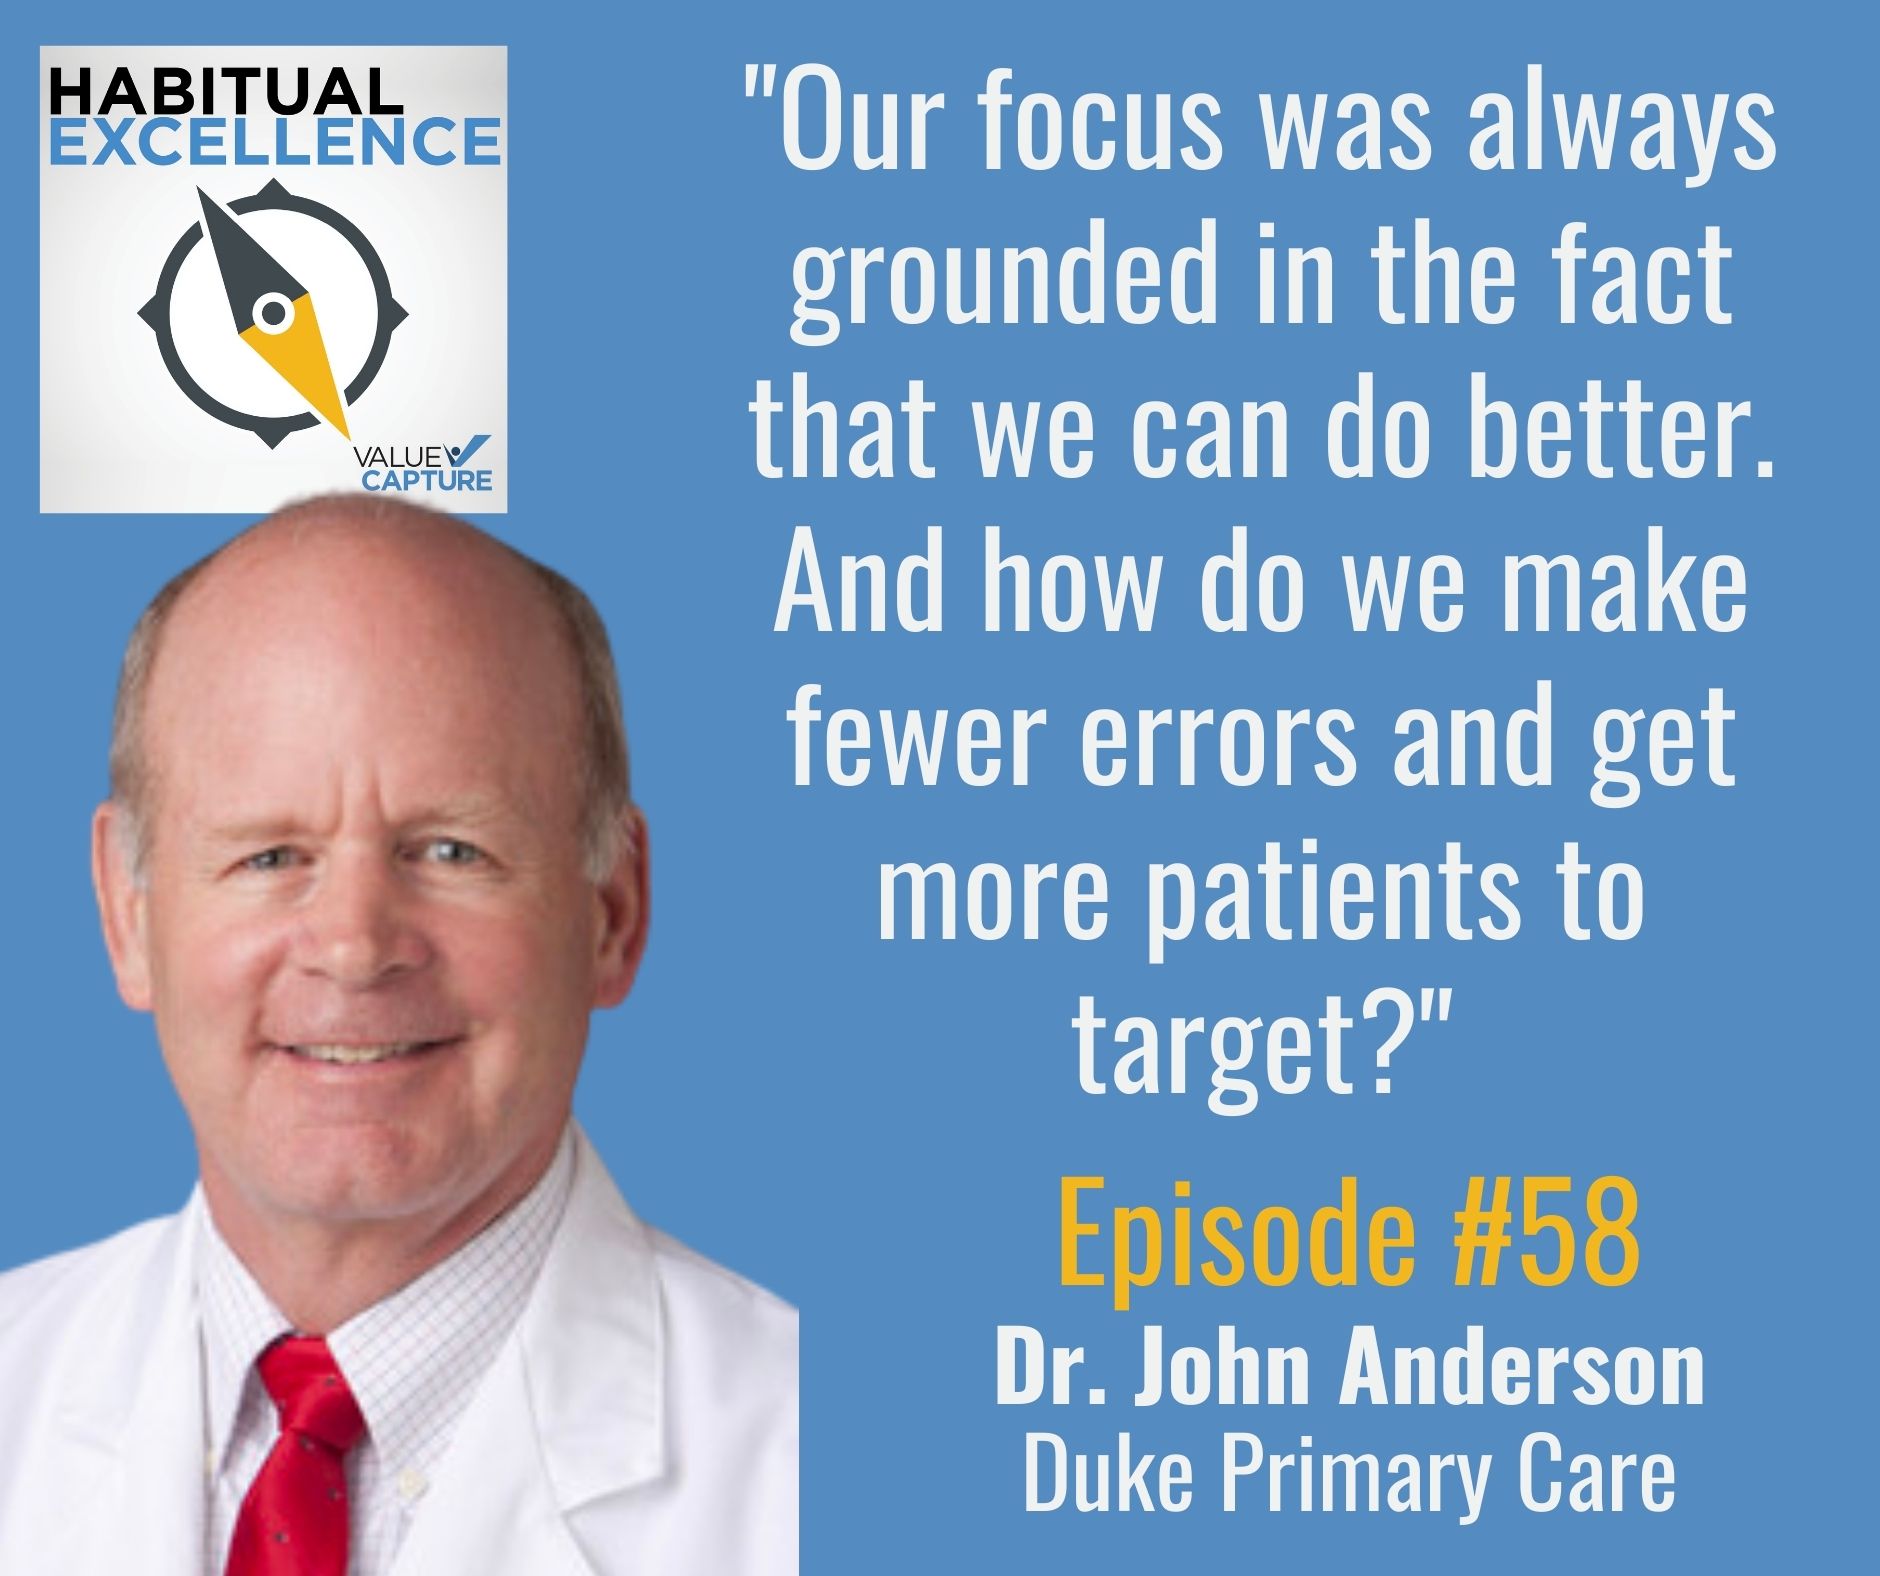 "Our focus was always grounded in the fact that we can do better. And how do we make fewer errors and get more patients to target?"